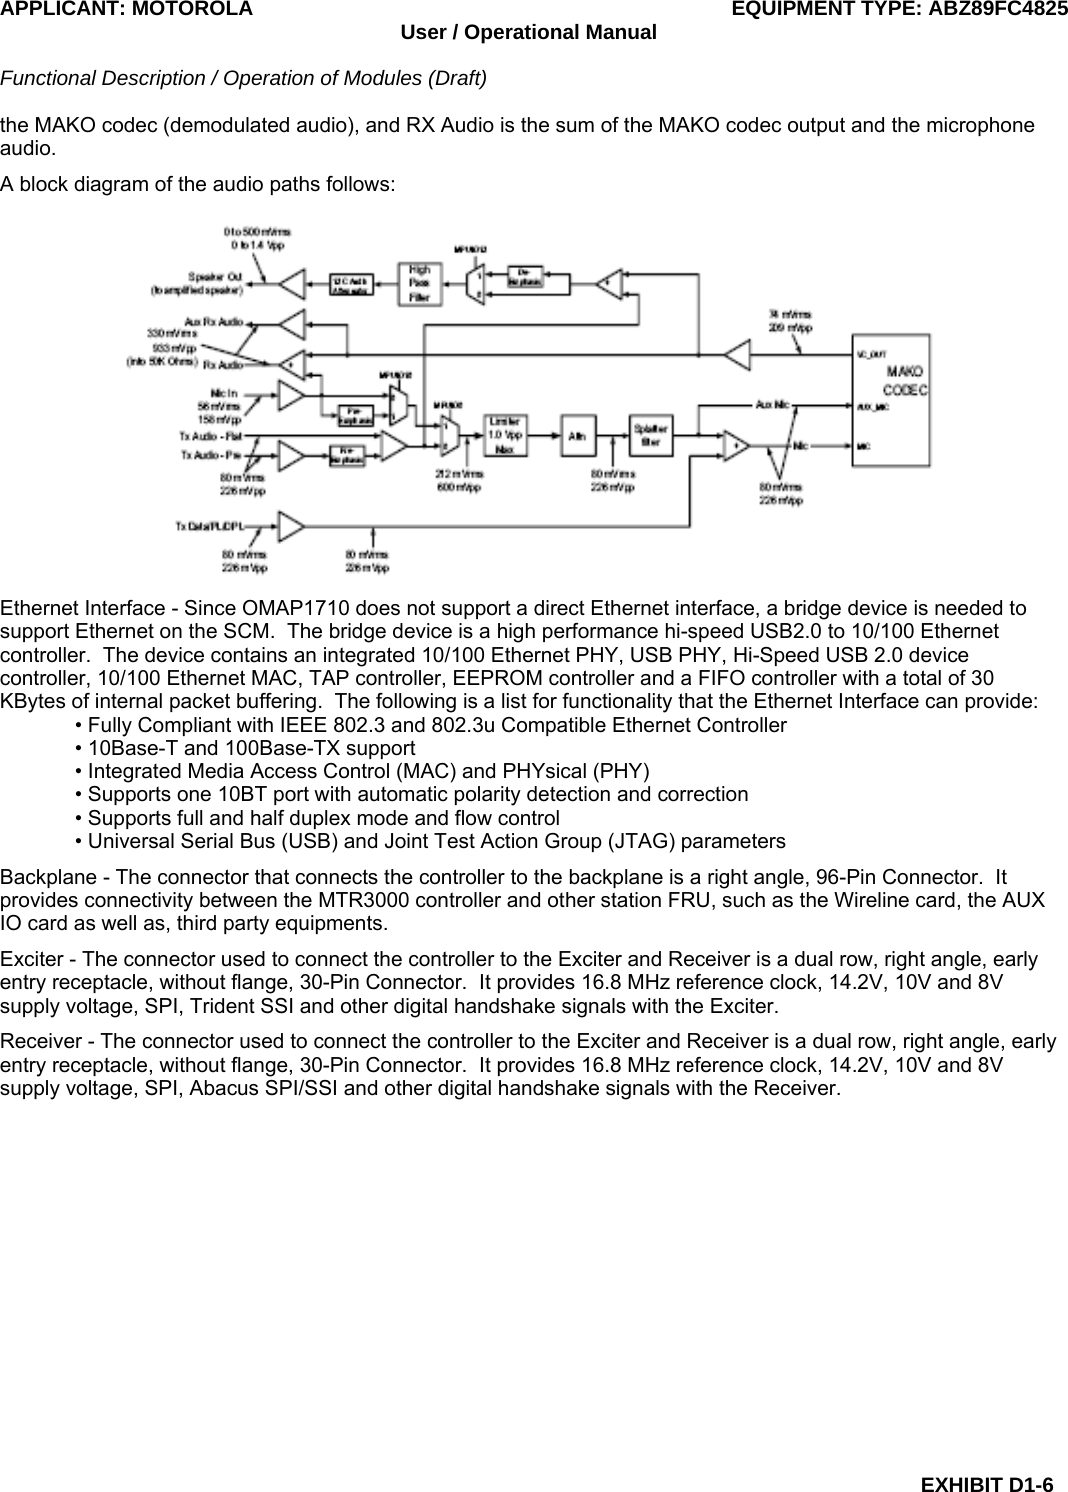 APPLICANT: MOTOROLA  EQUIPMENT TYPE: ABZ89FC4825 User / Operational Manual  Functional Description / Operation of Modules (Draft)  EXHIBIT D1-6 the MAKO codec (demodulated audio), and RX Audio is the sum of the MAKO codec output and the microphone audio. A block diagram of the audio paths follows:  Ethernet Interface - Since OMAP1710 does not support a direct Ethernet interface, a bridge device is needed to support Ethernet on the SCM.  The bridge device is a high performance hi-speed USB2.0 to 10/100 Ethernet controller.  The device contains an integrated 10/100 Ethernet PHY, USB PHY, Hi-Speed USB 2.0 device controller, 10/100 Ethernet MAC, TAP controller, EEPROM controller and a FIFO controller with a total of 30 KBytes of internal packet buffering.  The following is a list for functionality that the Ethernet Interface can provide: • Fully Compliant with IEEE 802.3 and 802.3u Compatible Ethernet Controller • 10Base-T and 100Base-TX support • Integrated Media Access Control (MAC) and PHYsical (PHY) • Supports one 10BT port with automatic polarity detection and correction • Supports full and half duplex mode and flow control • Universal Serial Bus (USB) and Joint Test Action Group (JTAG) parameters Backplane - The connector that connects the controller to the backplane is a right angle, 96-Pin Connector.  It provides connectivity between the MTR3000 controller and other station FRU, such as the Wireline card, the AUX IO card as well as, third party equipments. Exciter - The connector used to connect the controller to the Exciter and Receiver is a dual row, right angle, early entry receptacle, without flange, 30-Pin Connector.  It provides 16.8 MHz reference clock, 14.2V, 10V and 8V supply voltage, SPI, Trident SSI and other digital handshake signals with the Exciter. Receiver - The connector used to connect the controller to the Exciter and Receiver is a dual row, right angle, early entry receptacle, without flange, 30-Pin Connector.  It provides 16.8 MHz reference clock, 14.2V, 10V and 8V supply voltage, SPI, Abacus SPI/SSI and other digital handshake signals with the Receiver.  